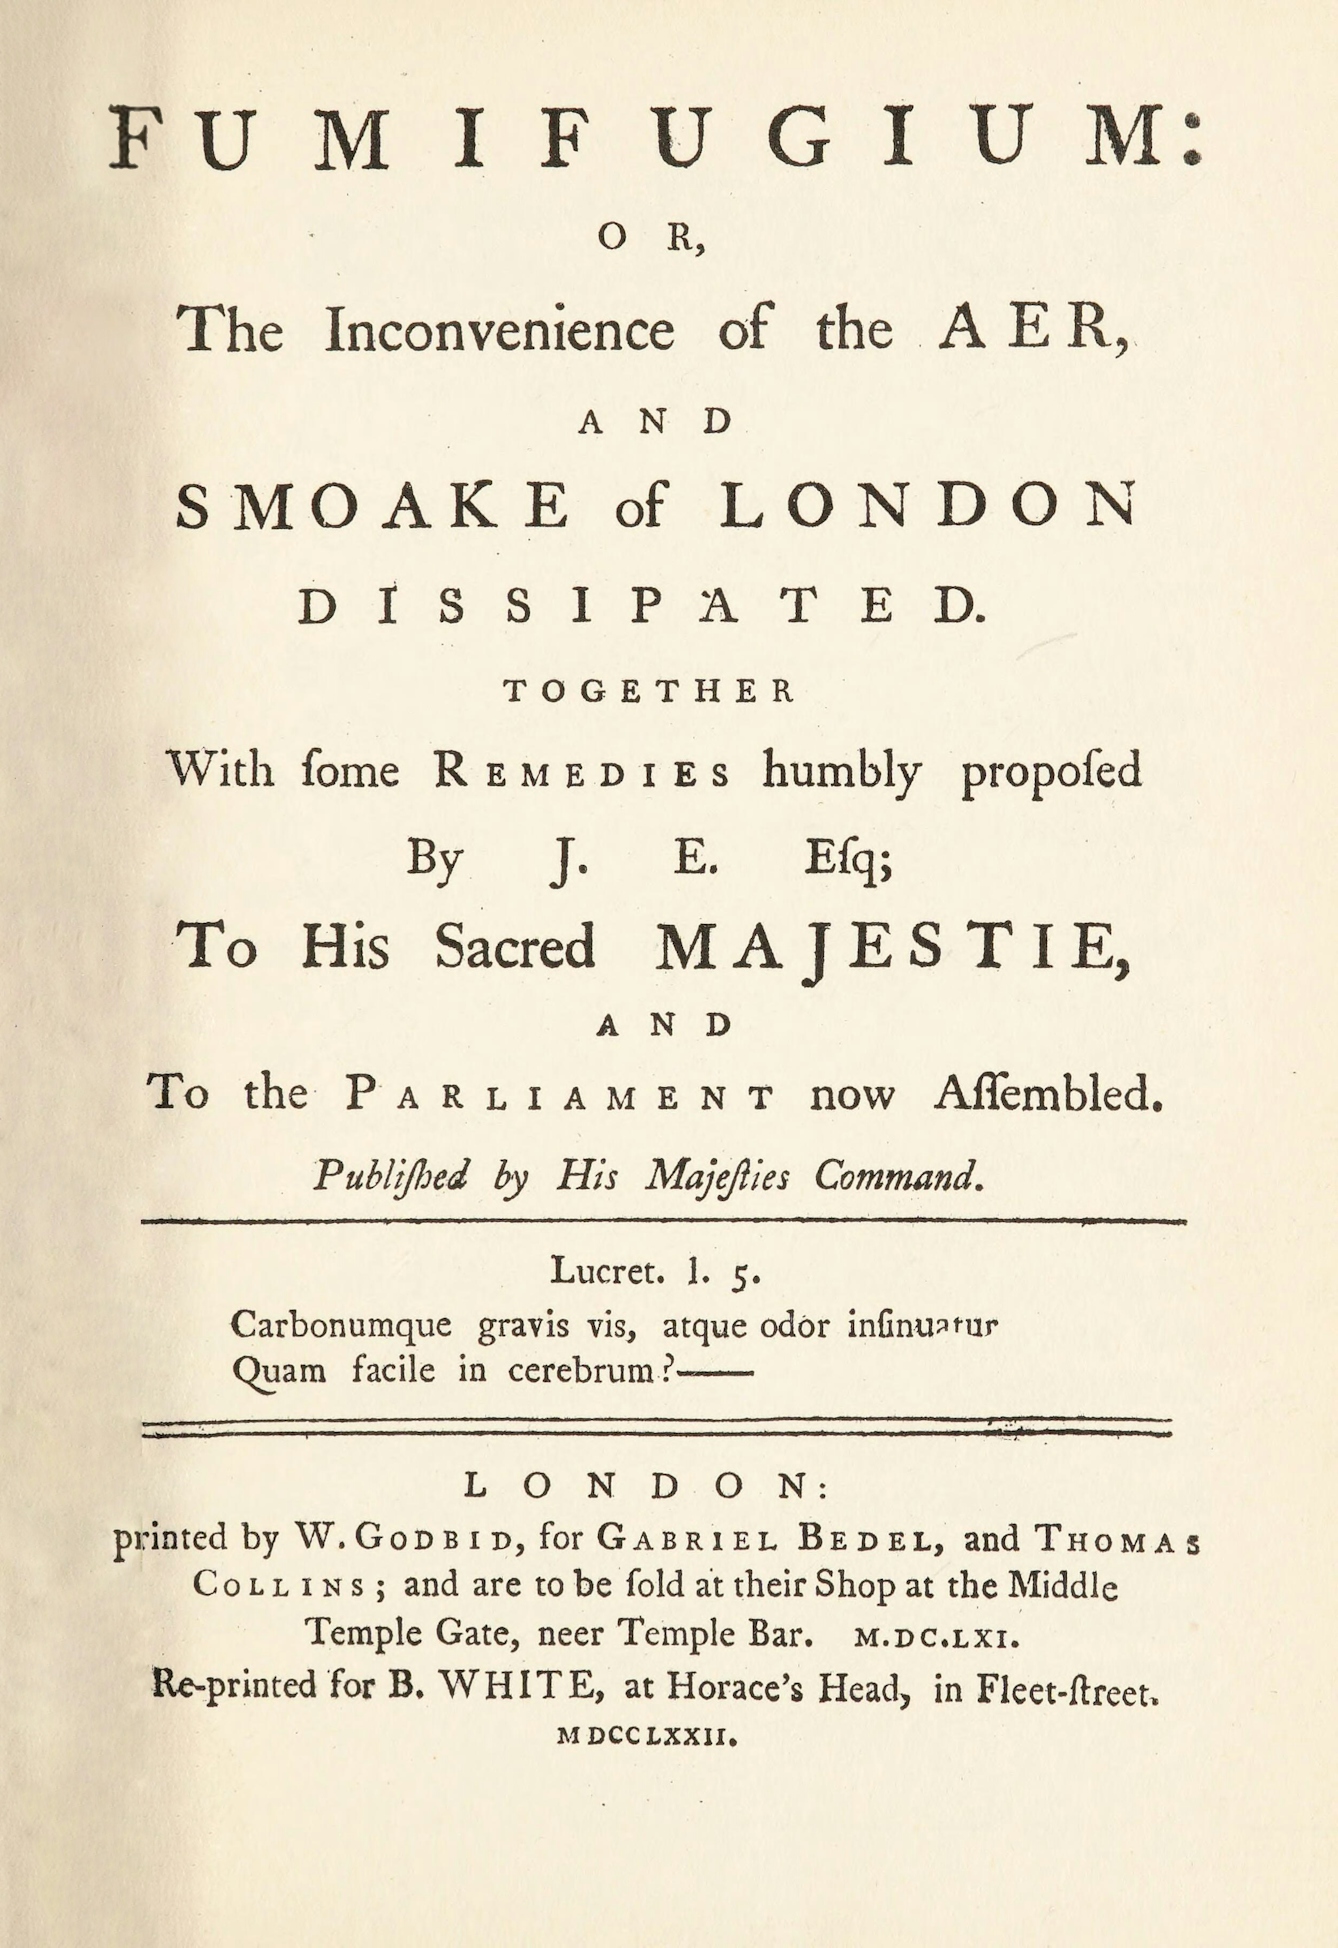 Frontispiece of Fumifugium, which reads: Fumifugium: or The Inconvenience of the Aer, and Smoake of London dissipated. Together with some remedies humby proposed by J. E. Esq; To His Sacred Majestie, and to the Parliament now Assembled. 